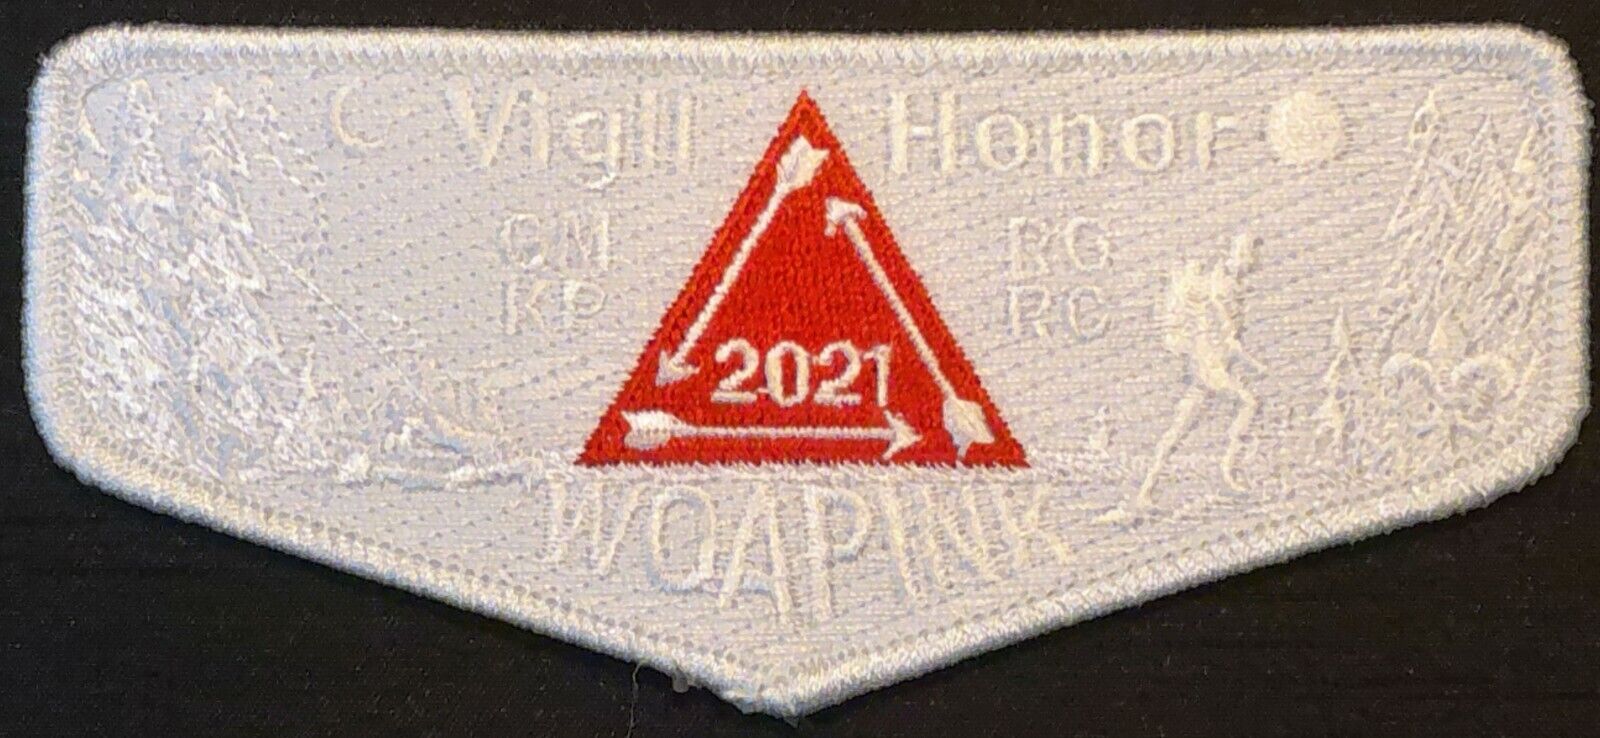 OA WOAPINK LODGE 167 BSA LINCOLN TRAILS PATCH 2021 2022 GHOST VIGIL HONOR FLAP